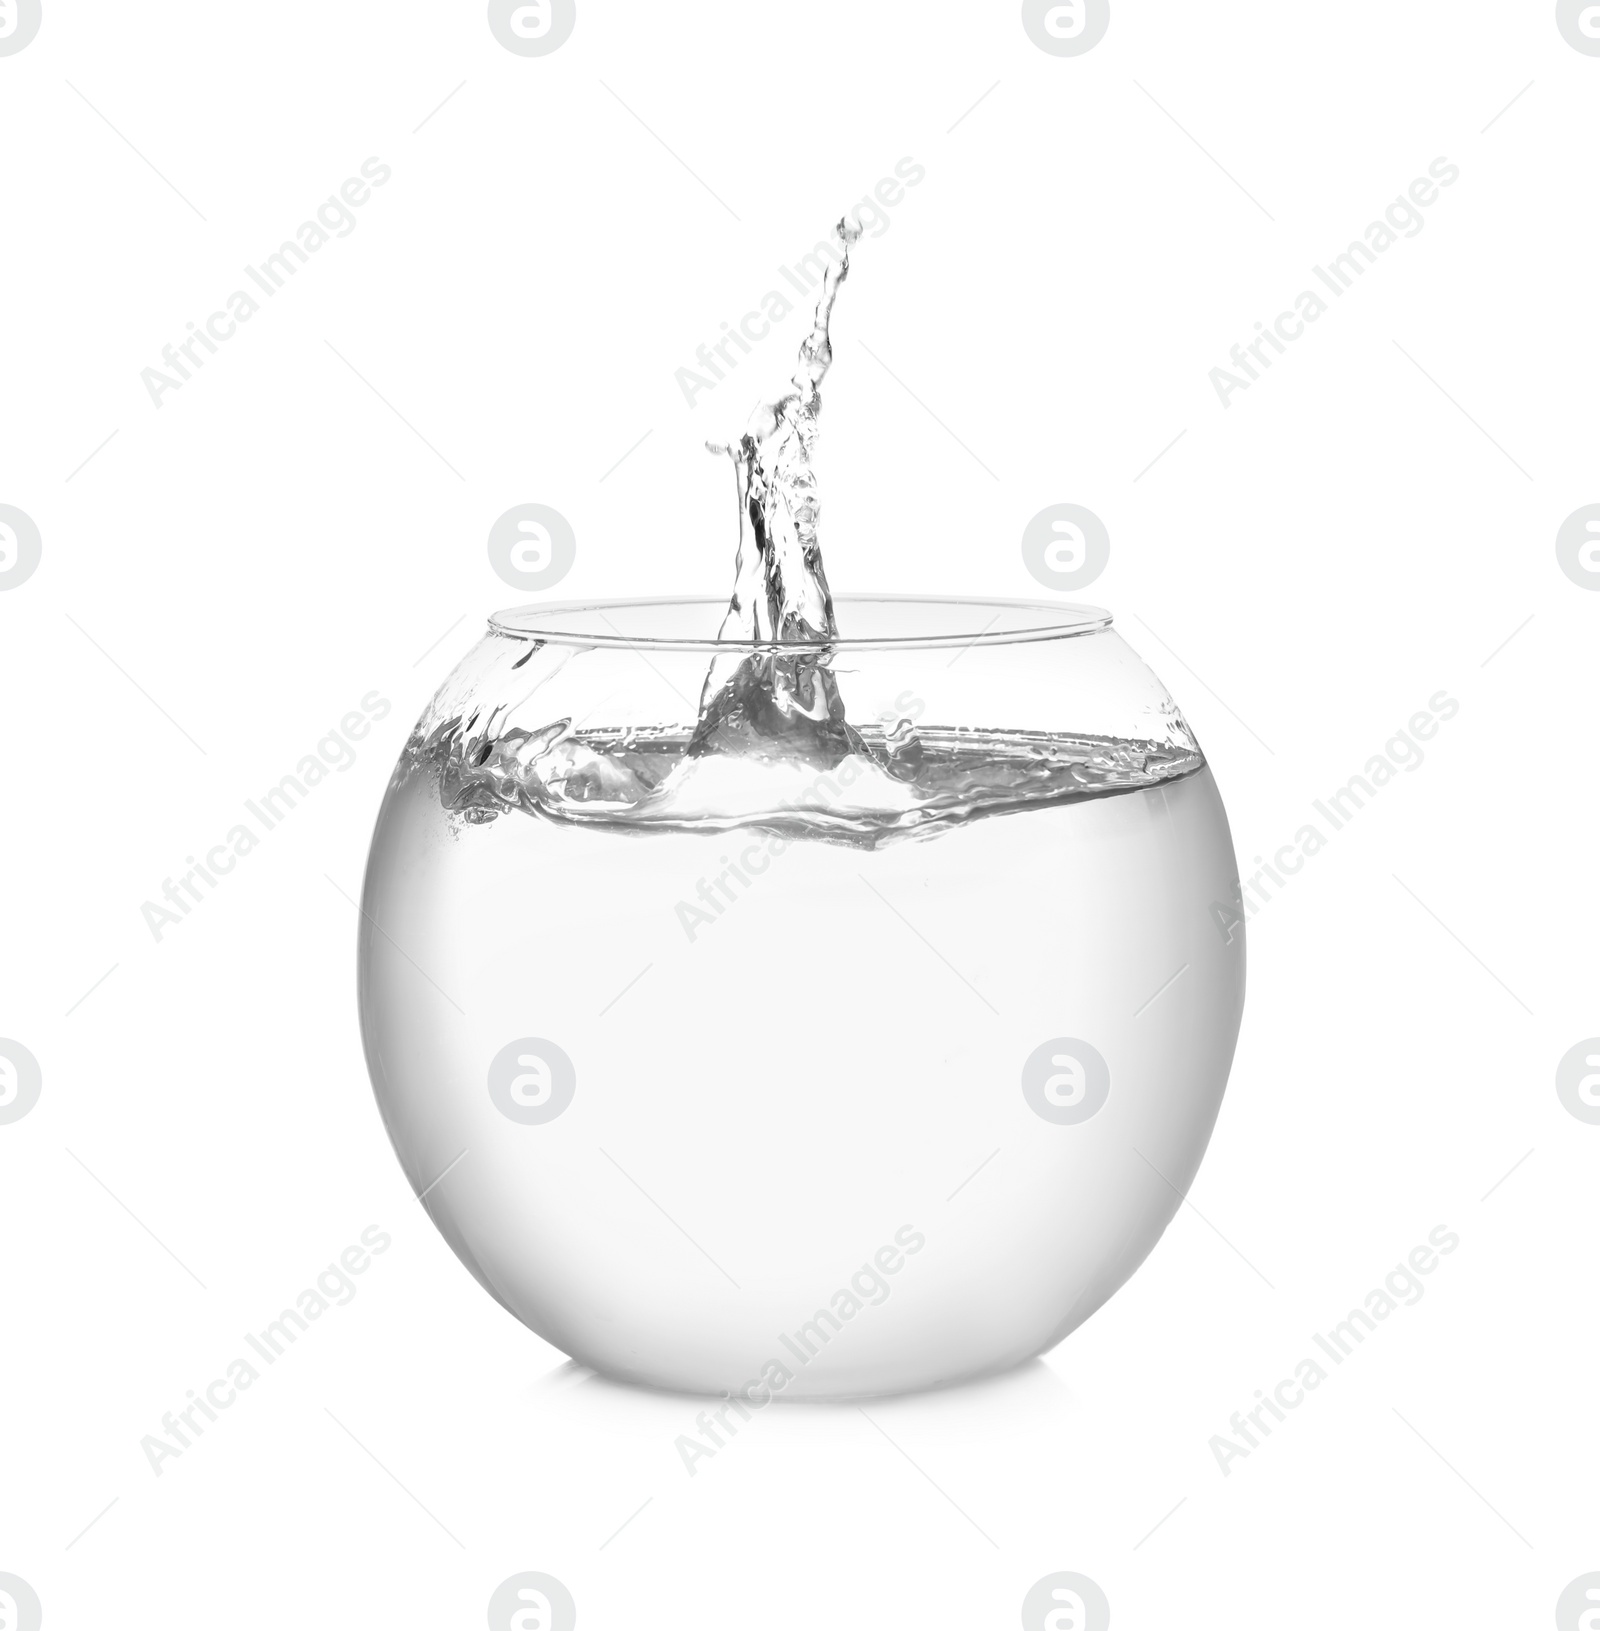 Photo of Splash of water in round fish bowl on white background